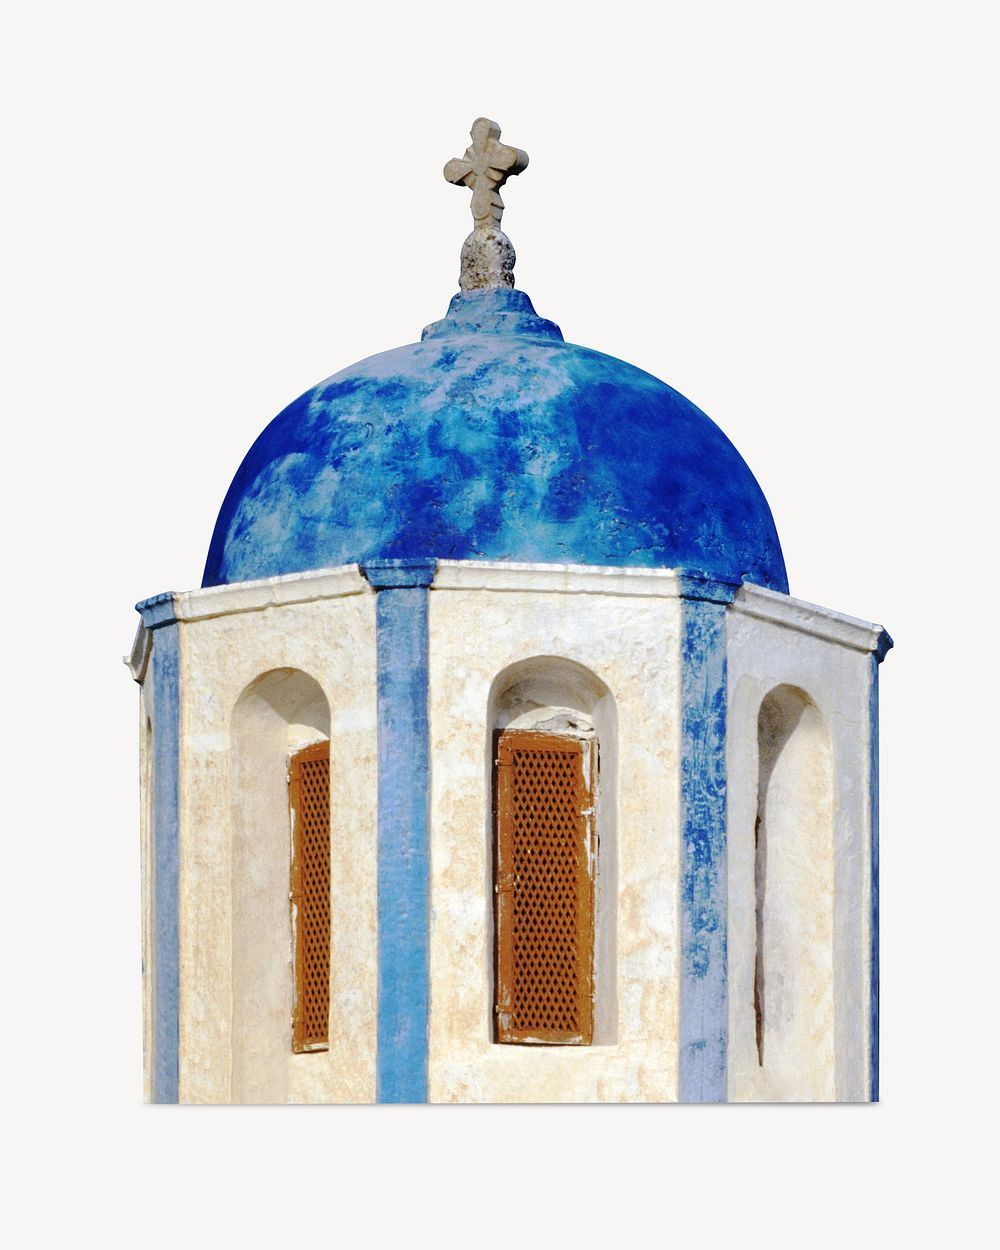 Christian church, isolated image